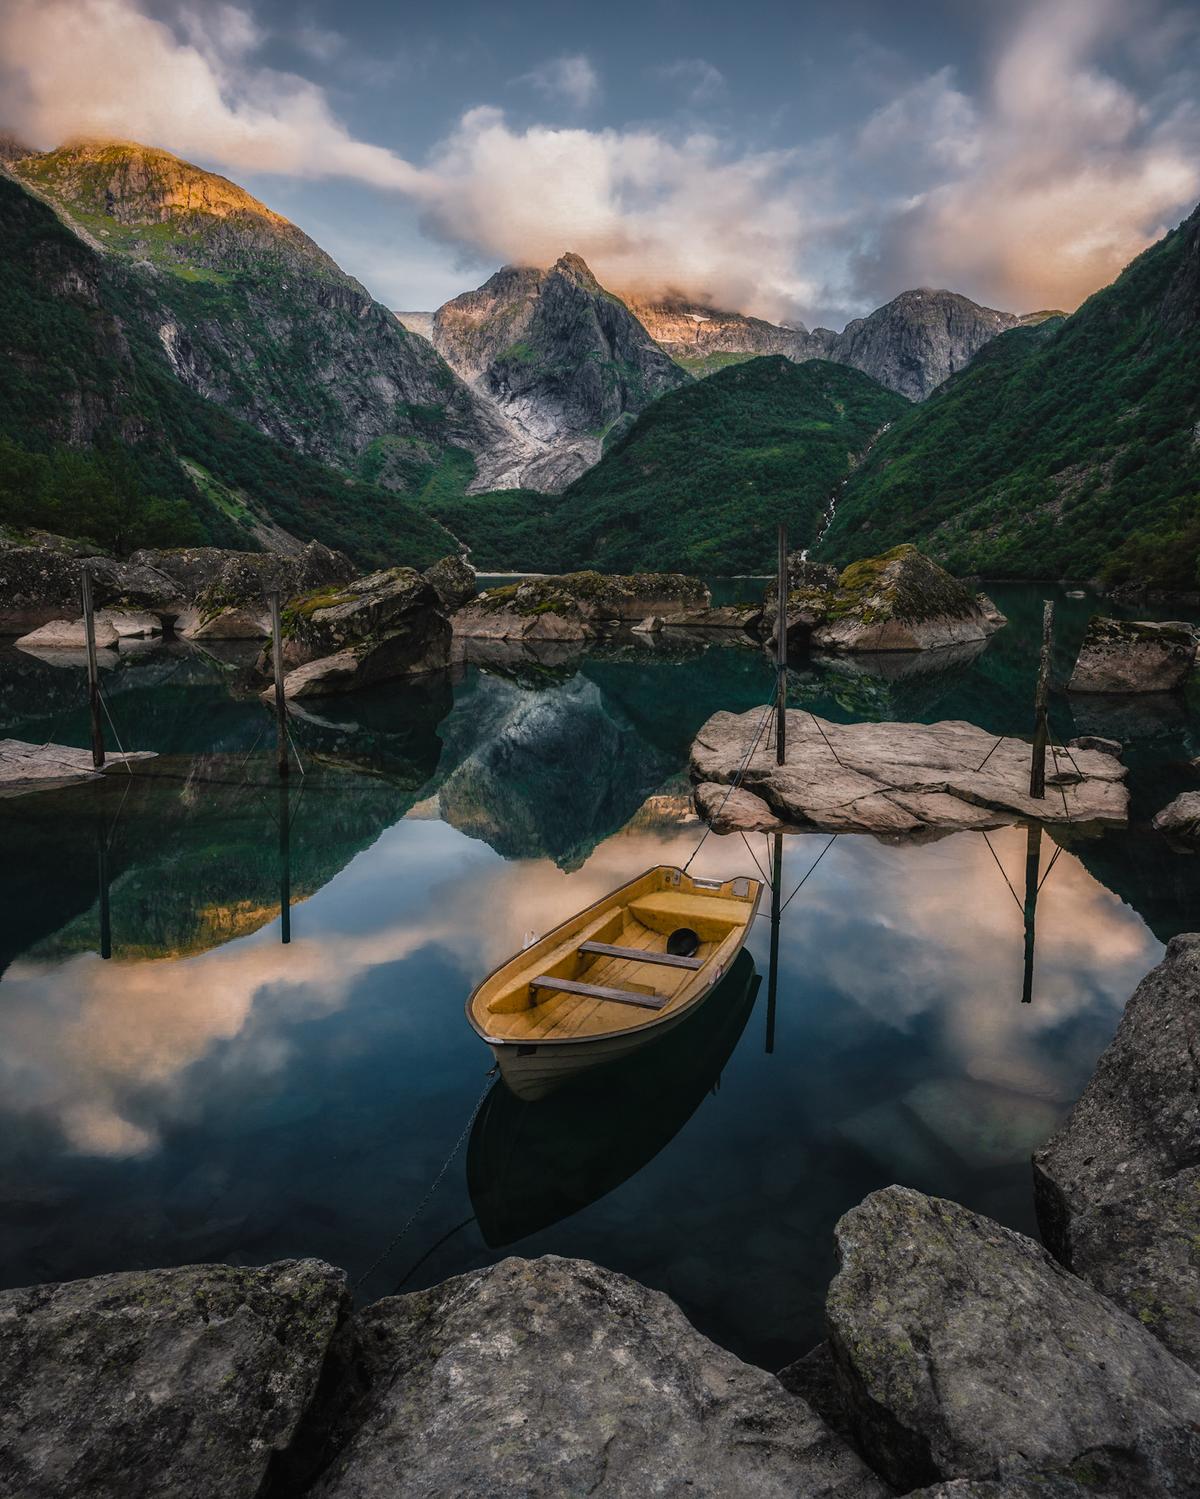 "Bondhusvatnet Glacier" by Hans Kristian Strand, Norway; “I love this peaceful place. I visit the Bondhusvatnet glacier every year hoping to get the perfect picture, and this year I finally got it.” (© Hans Kristian Strand, Norway, Winner, National Awards, Landscape, 2022 Sony World Photography Awards)